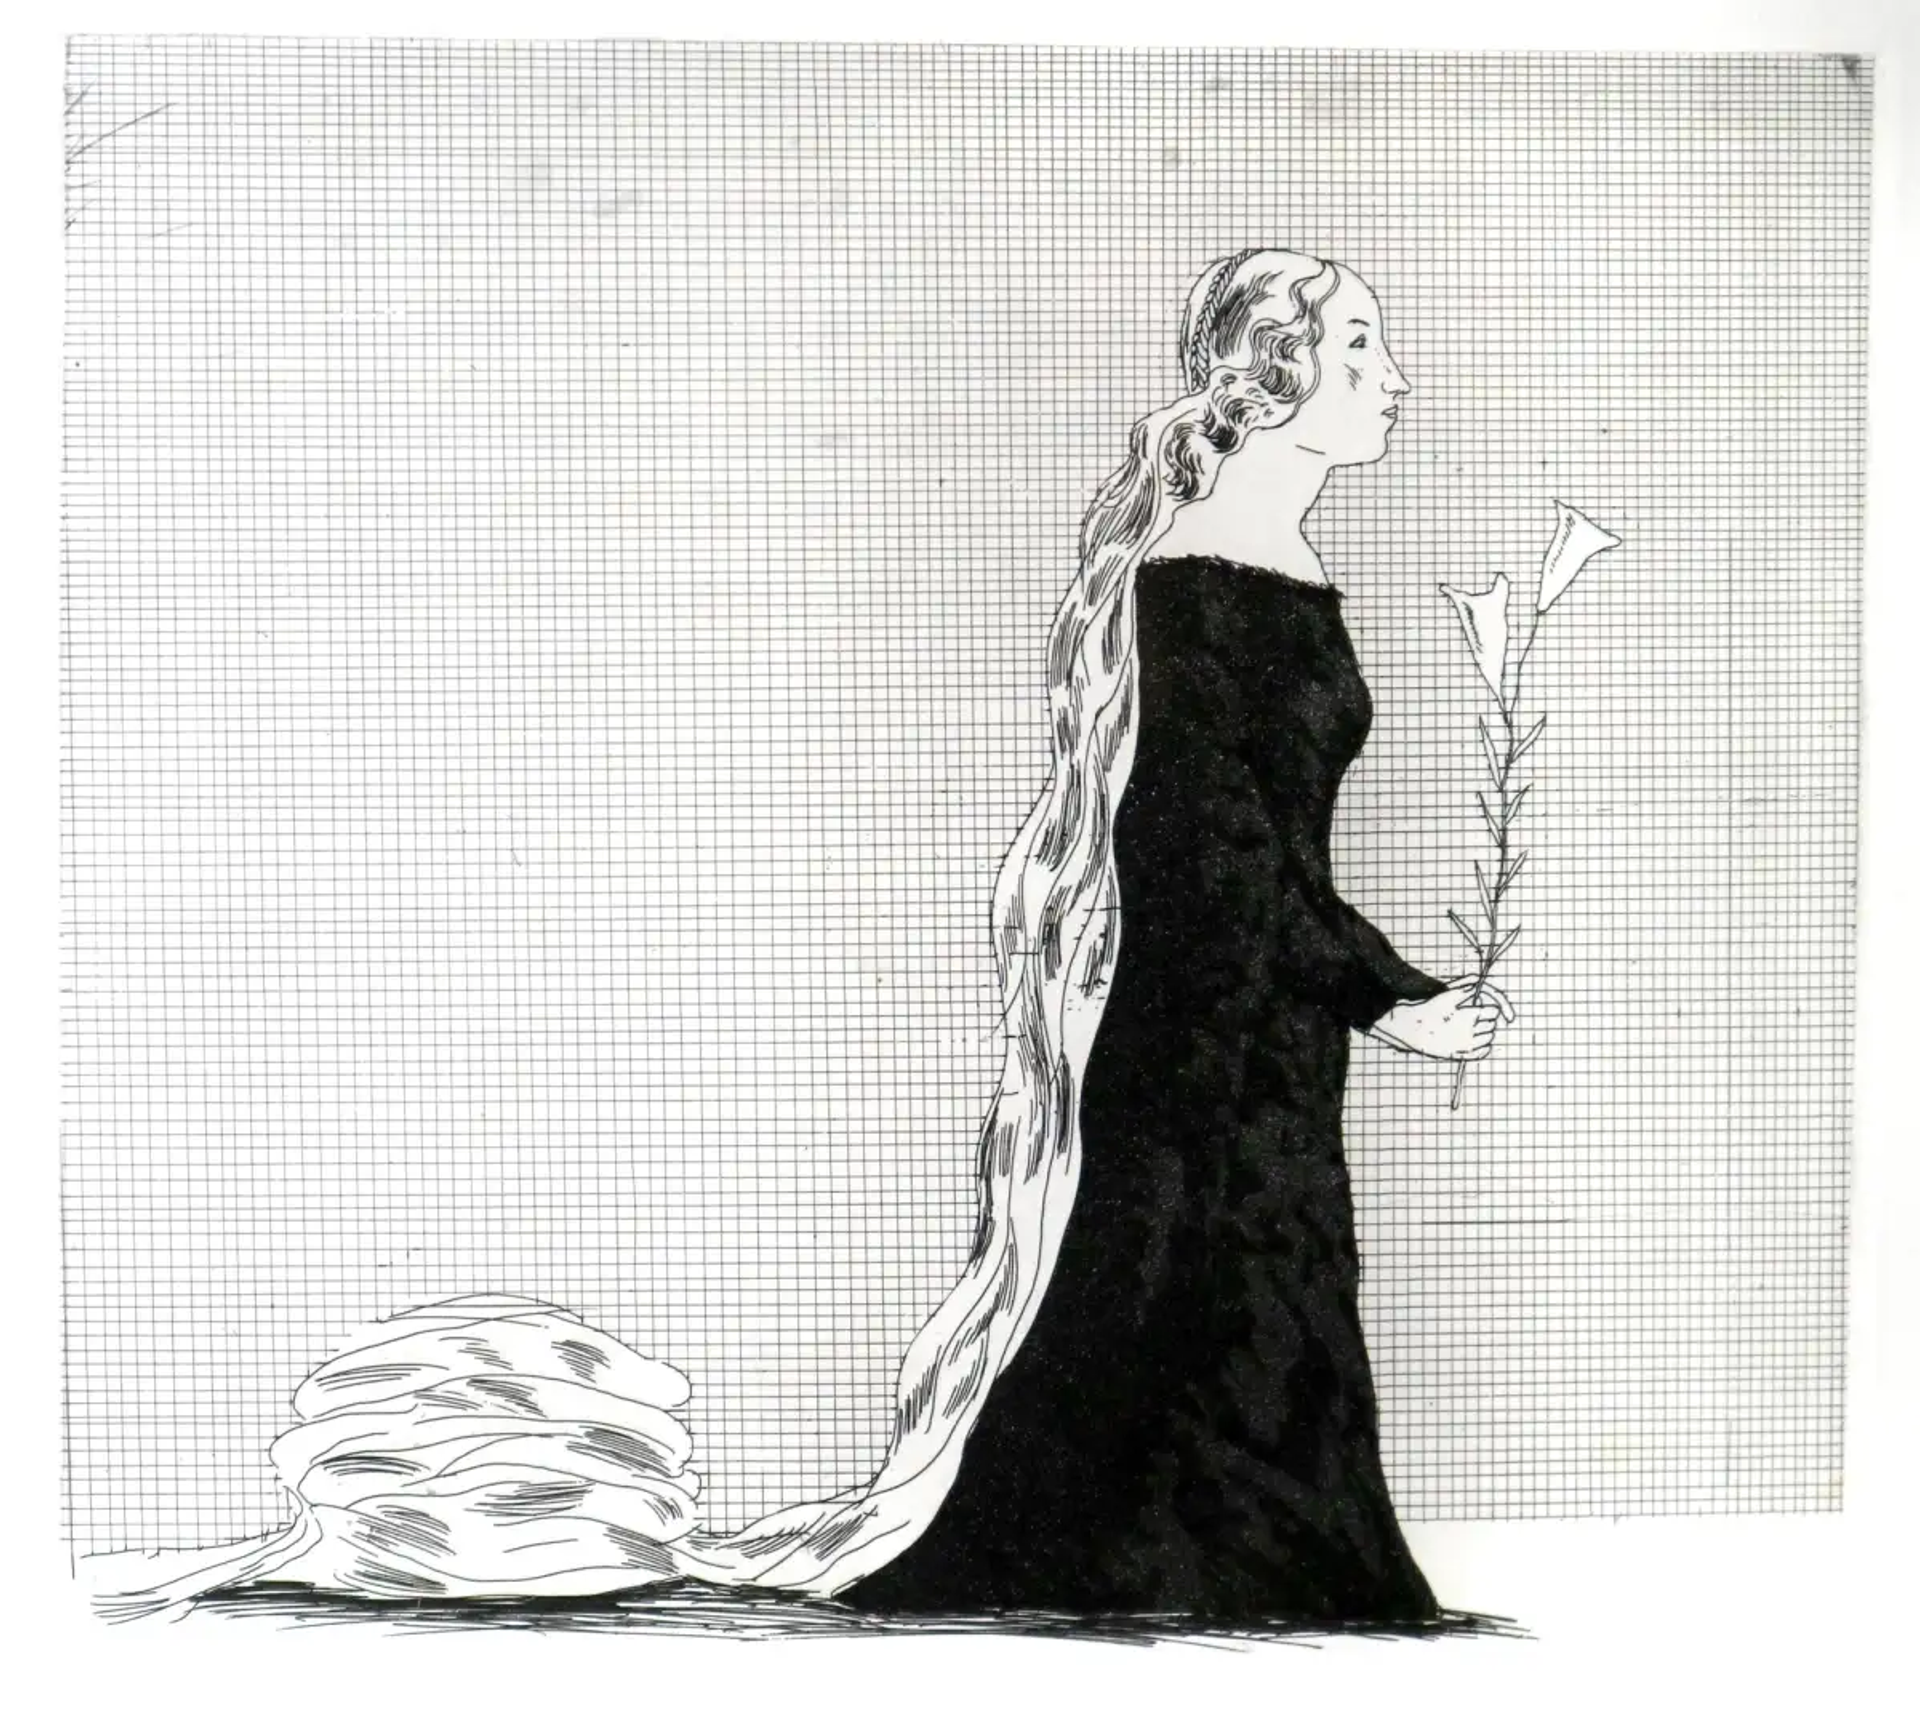 A woman is shown in profile, her face resolutely fixed on something hidden from the viewer. Her hair is long, reaching all the way to the floor to become a snakelike coil. She holds a flower.